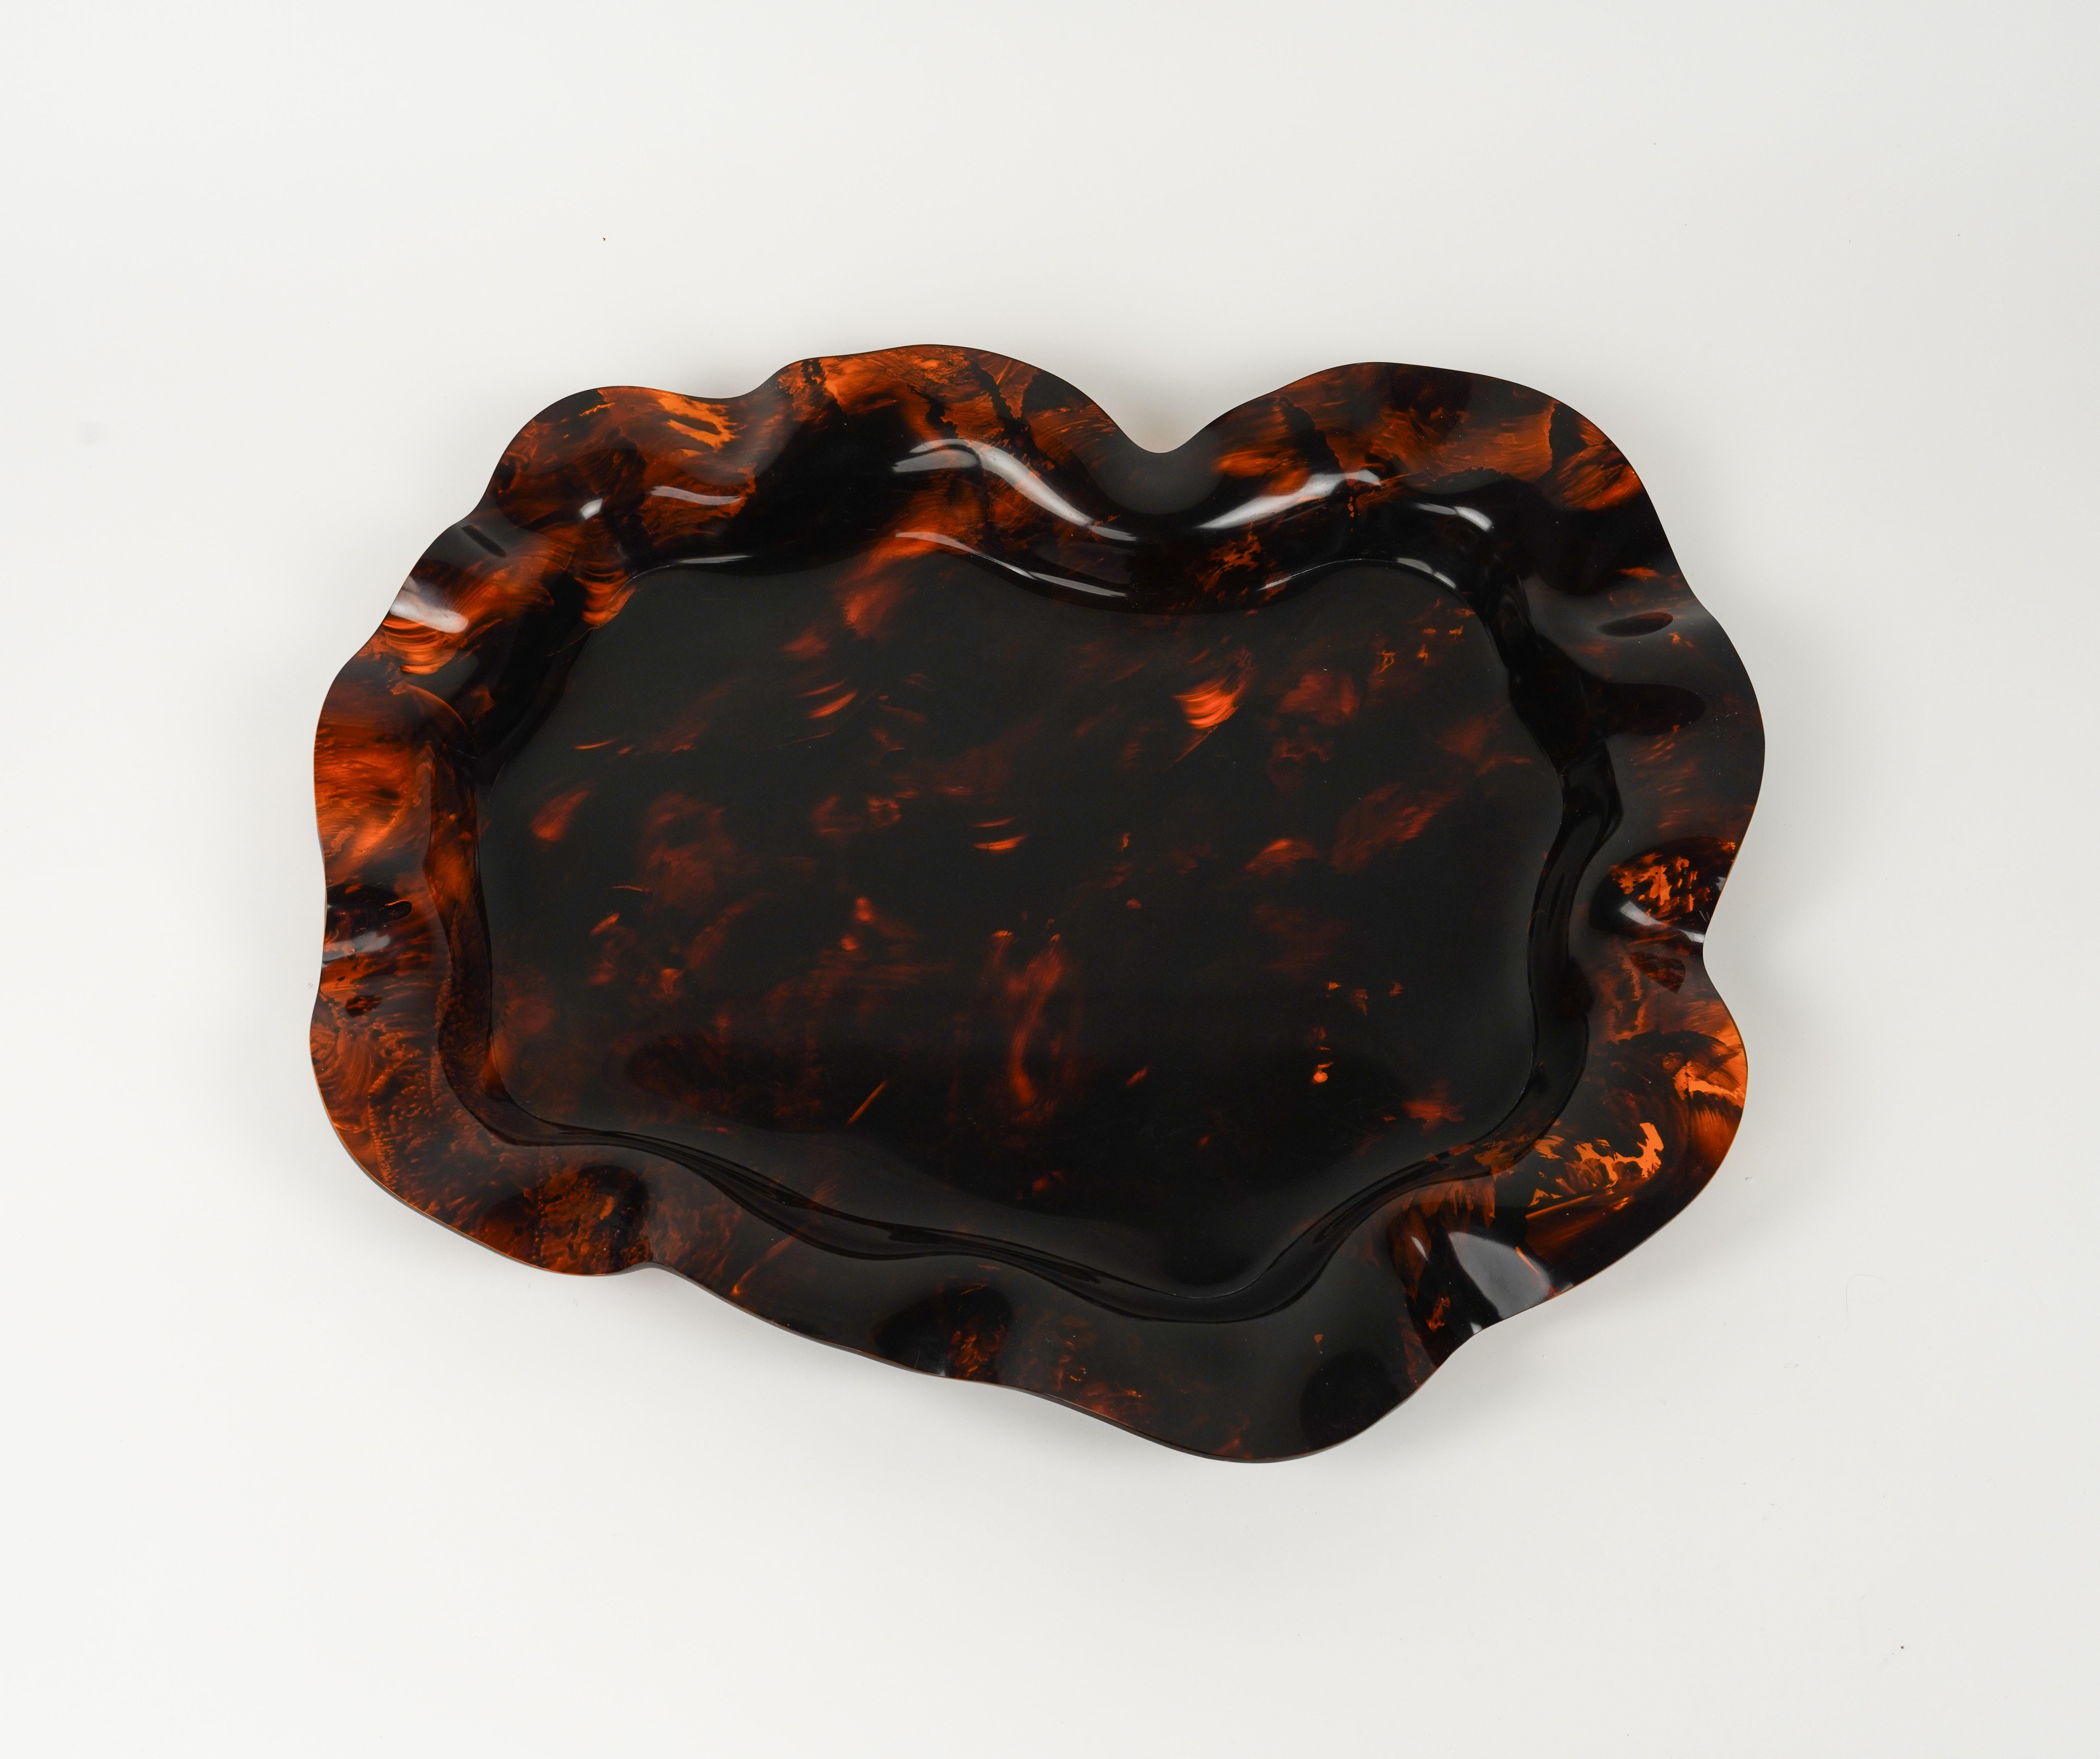 Midcentury amazing large serving tray or centerpiece in lucite faux tortoiseshell effect in the style of Christian Dior.

Made in Italy in the 1970s.